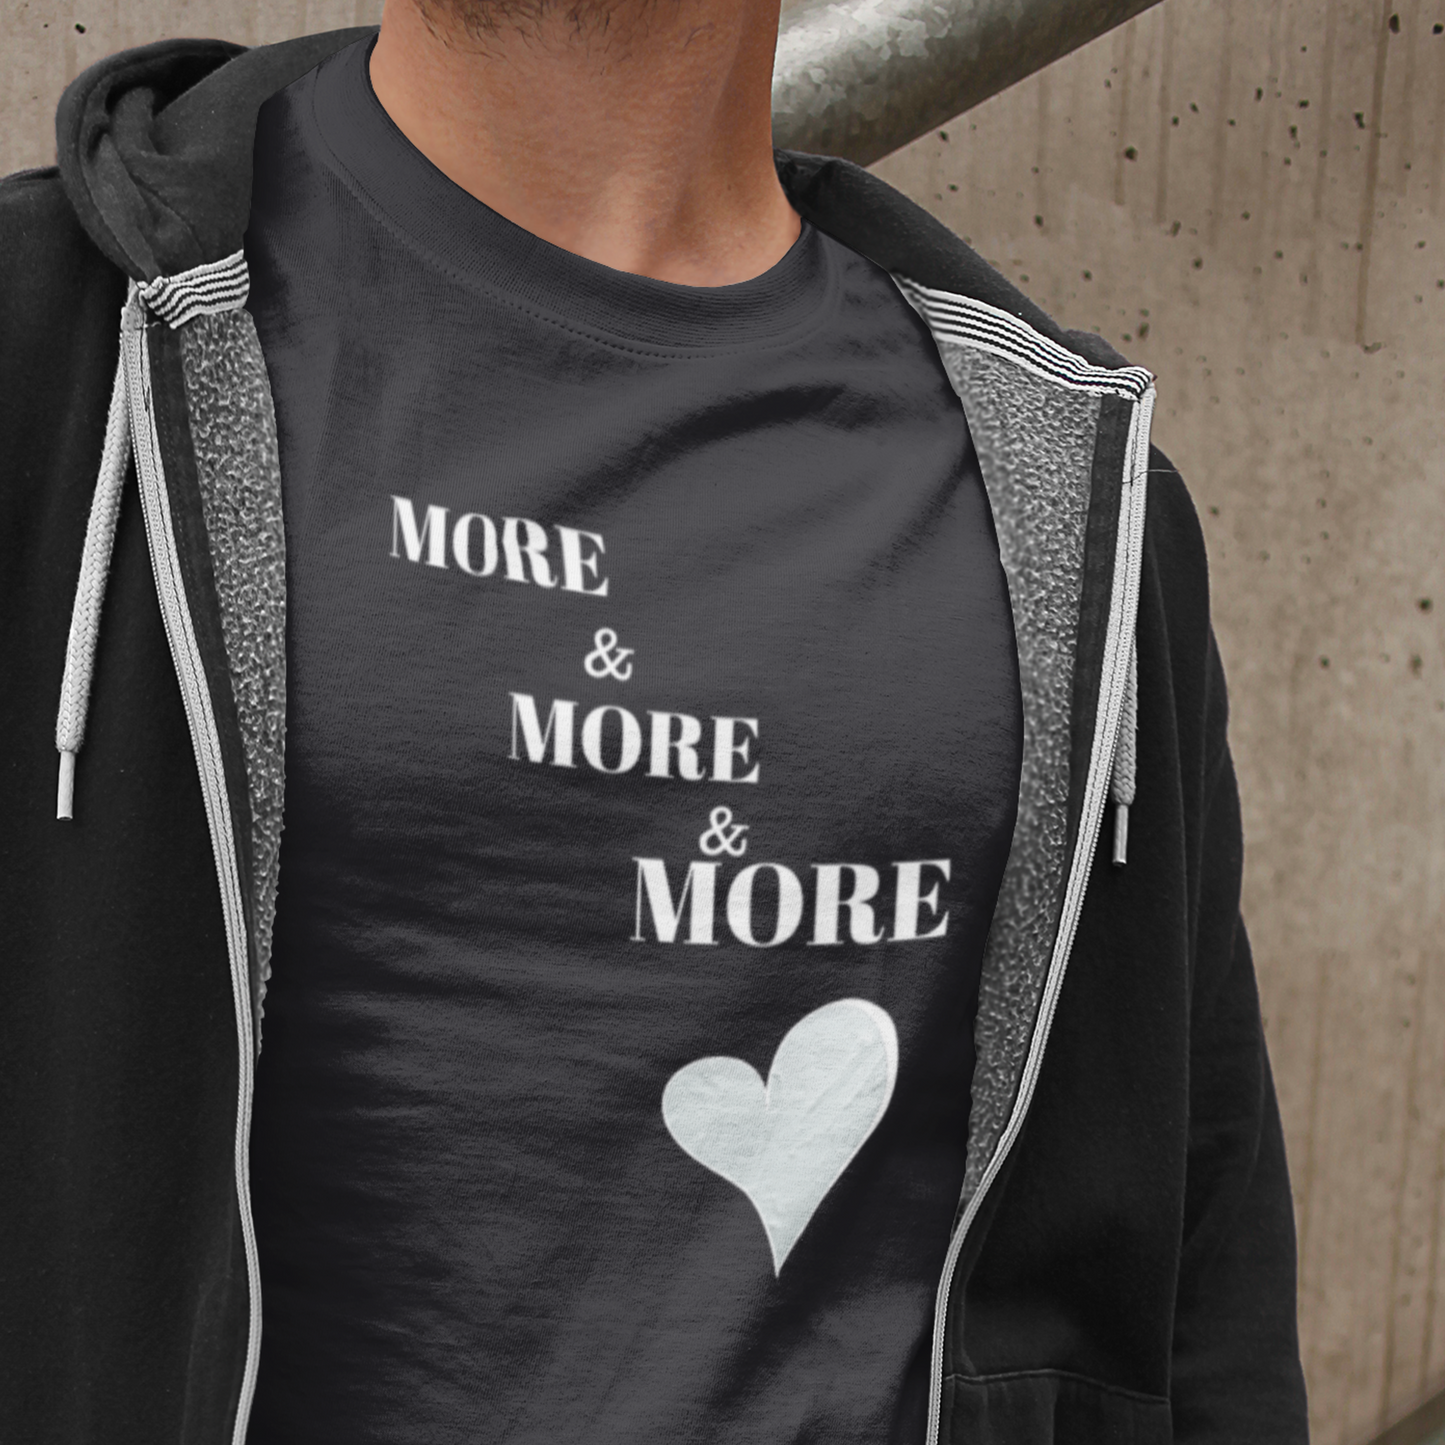 More and more and more love tshirt  gift, t shirt gift for love, T shirt gift that celebrates self love